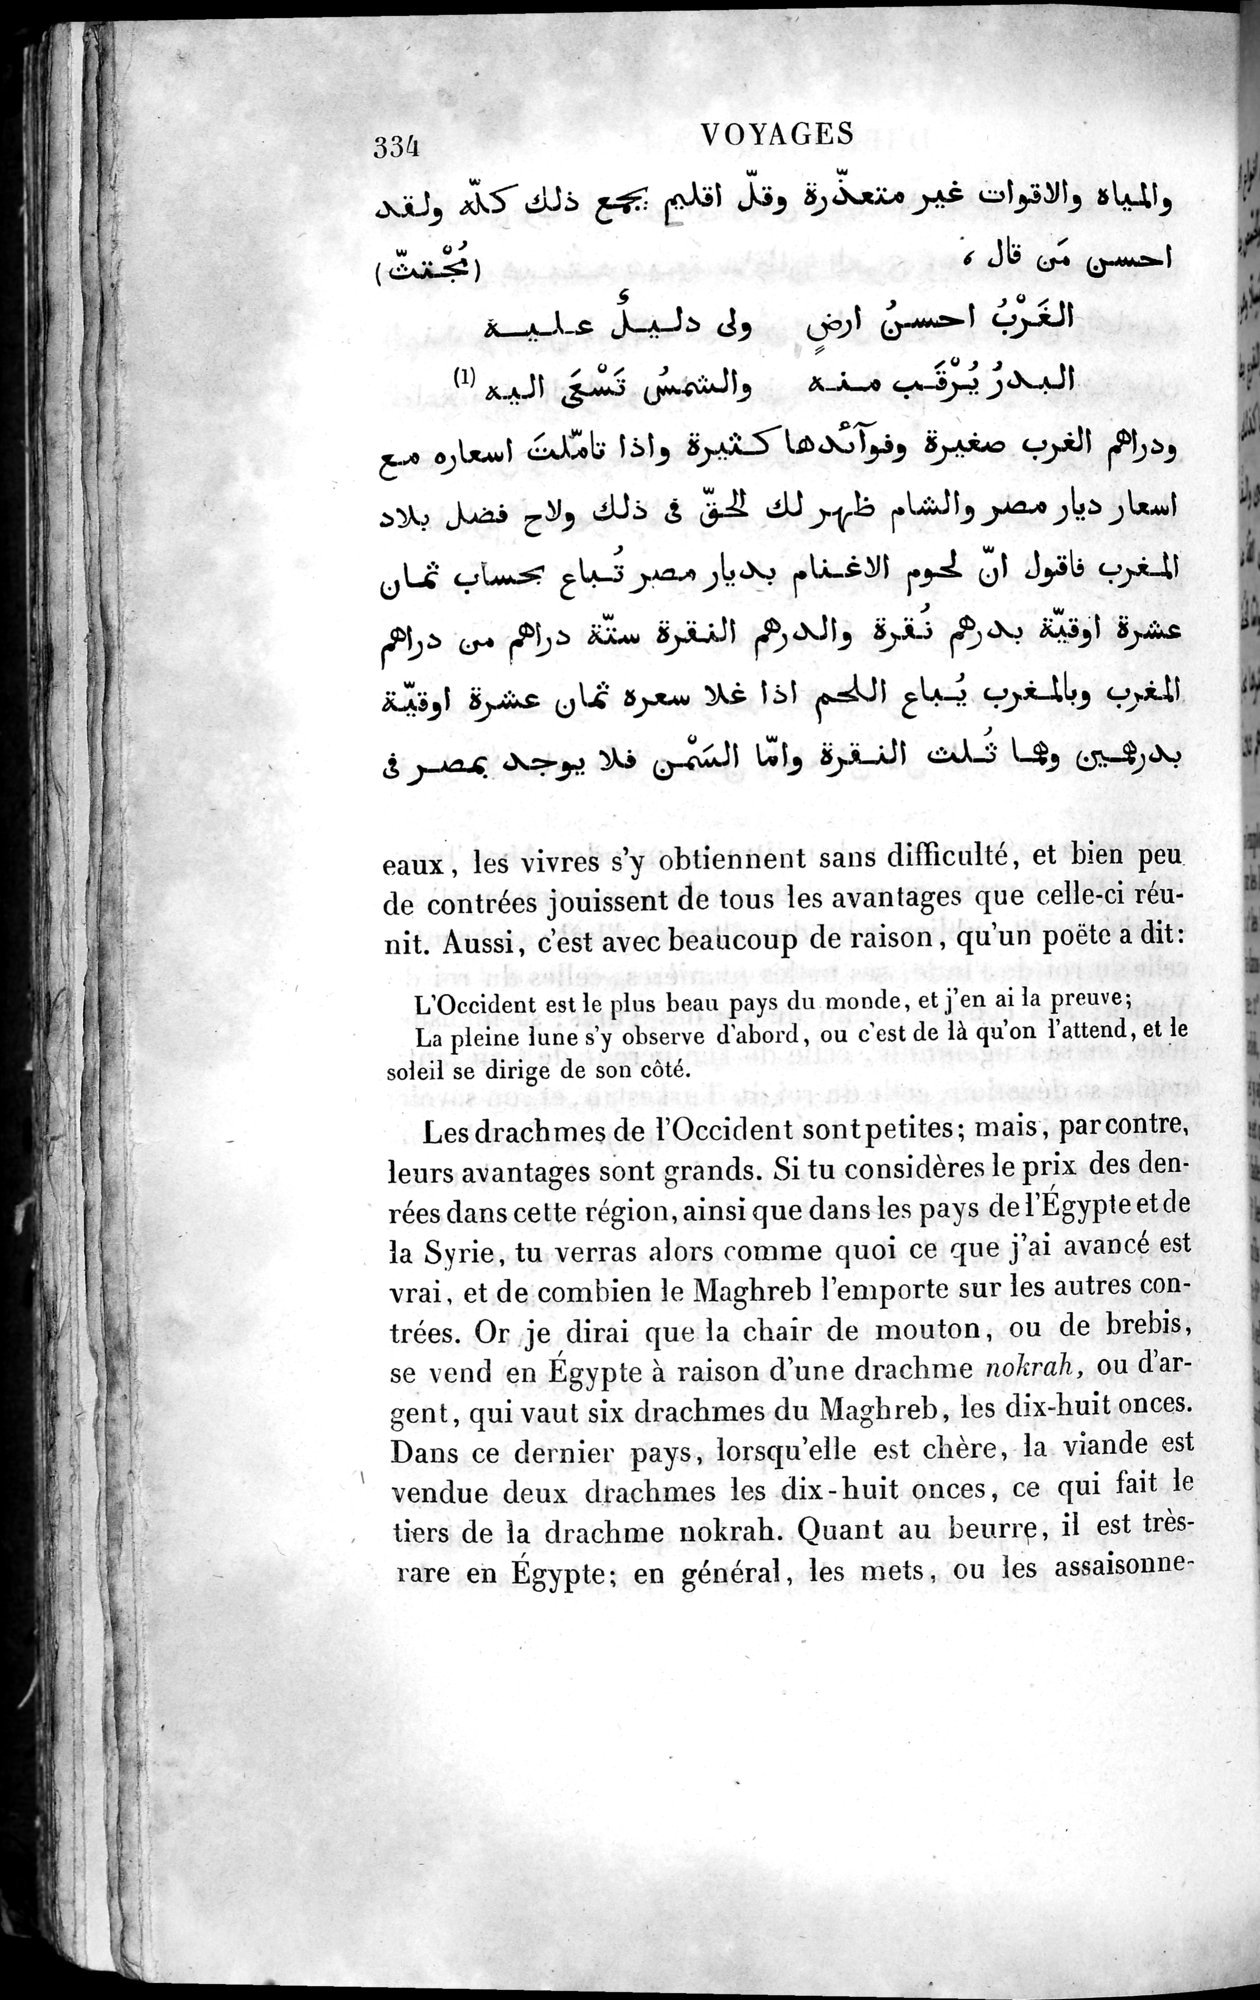 Voyages d'Ibn Batoutah : vol.4 / Page 346 (Grayscale High Resolution Image)